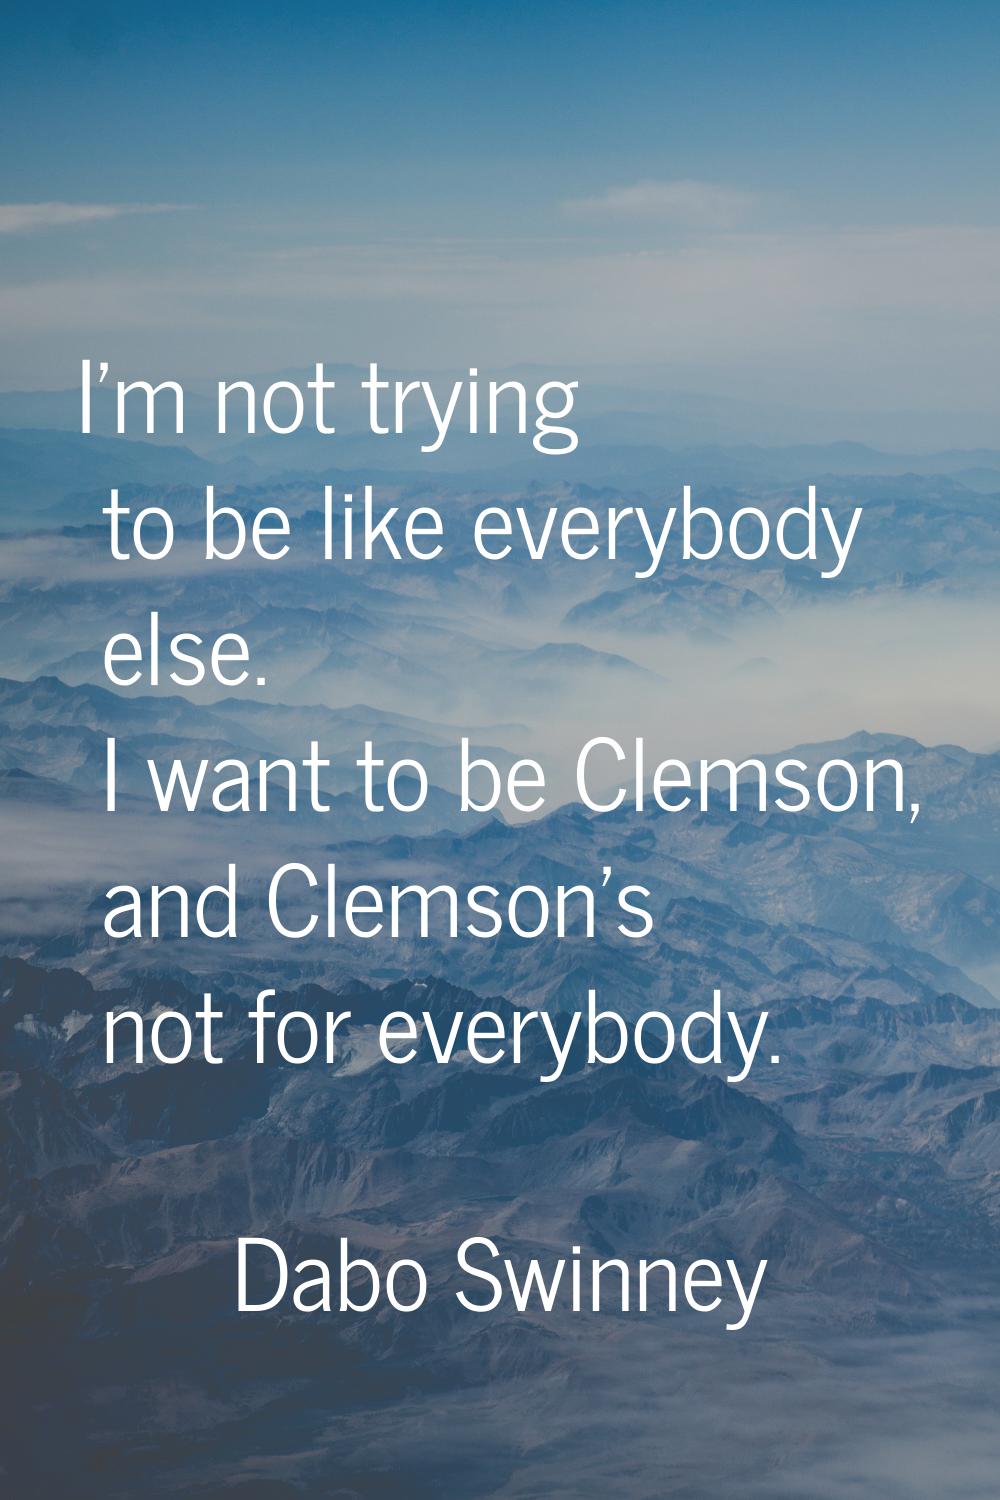 I'm not trying to be like everybody else. I want to be Clemson, and Clemson's not for everybody.